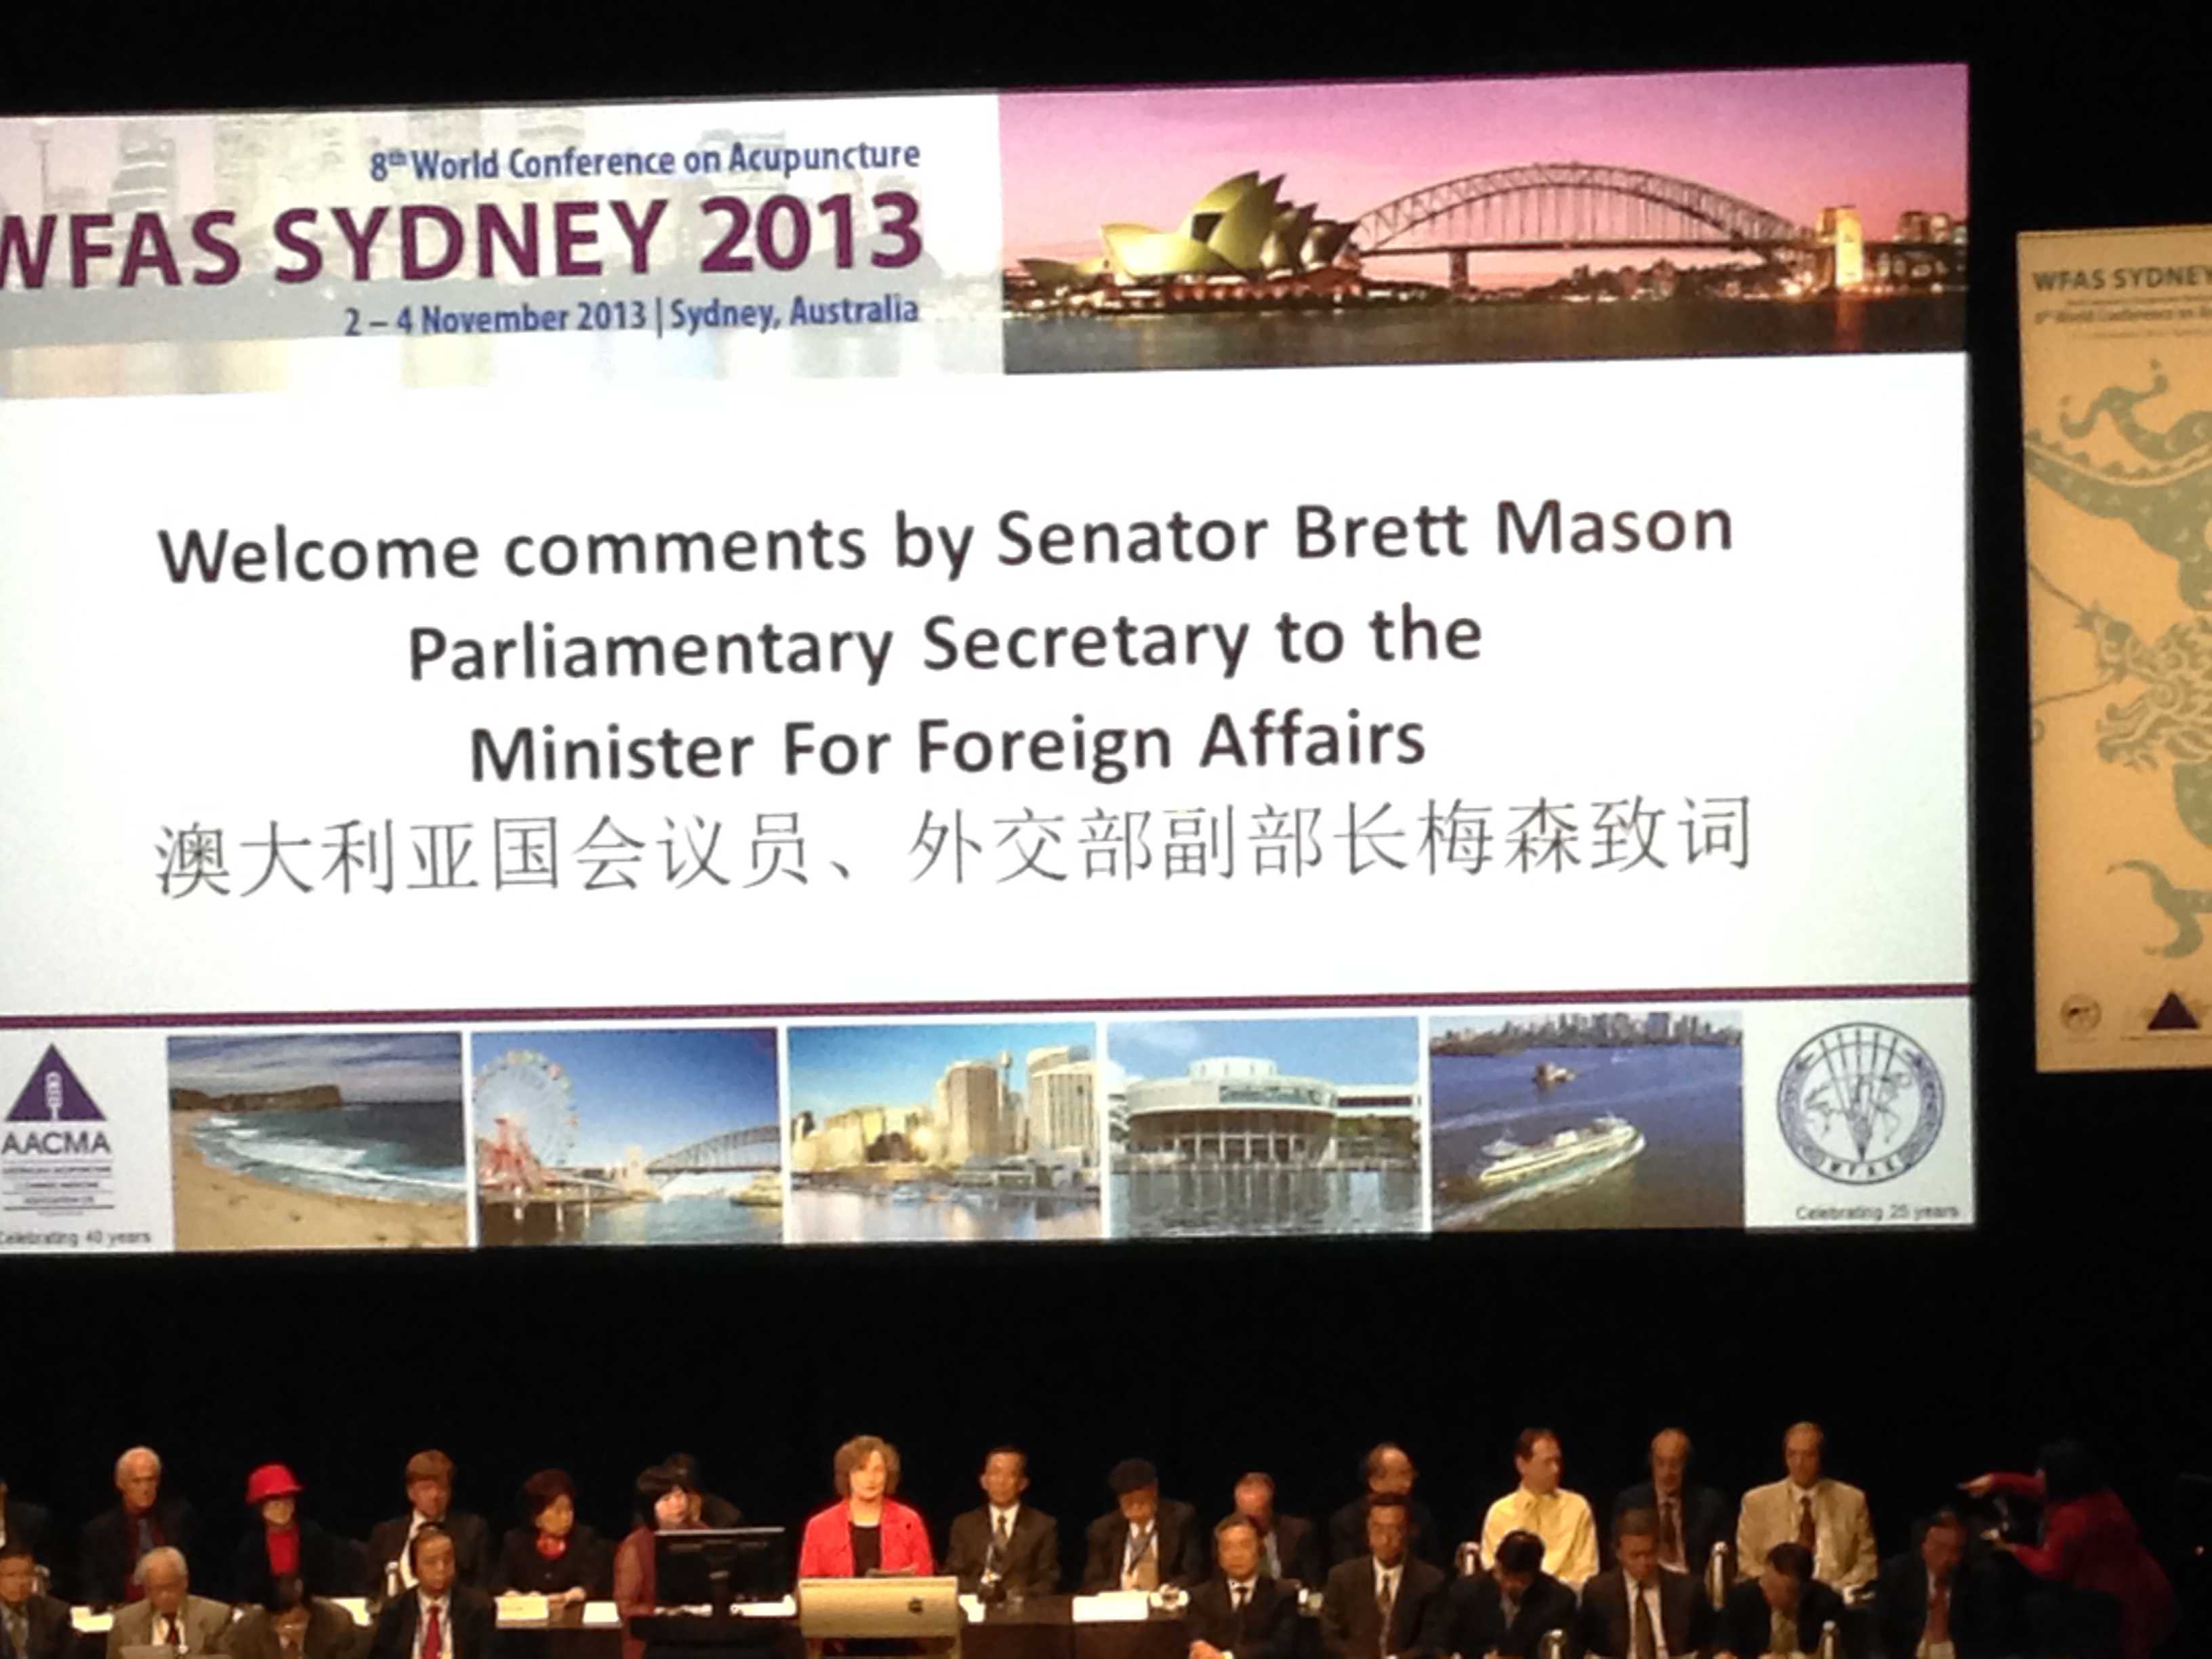 Attend World Federation of Acupuncture and Moxibustion Societies Convention in Sydney, Nov 2, 2013